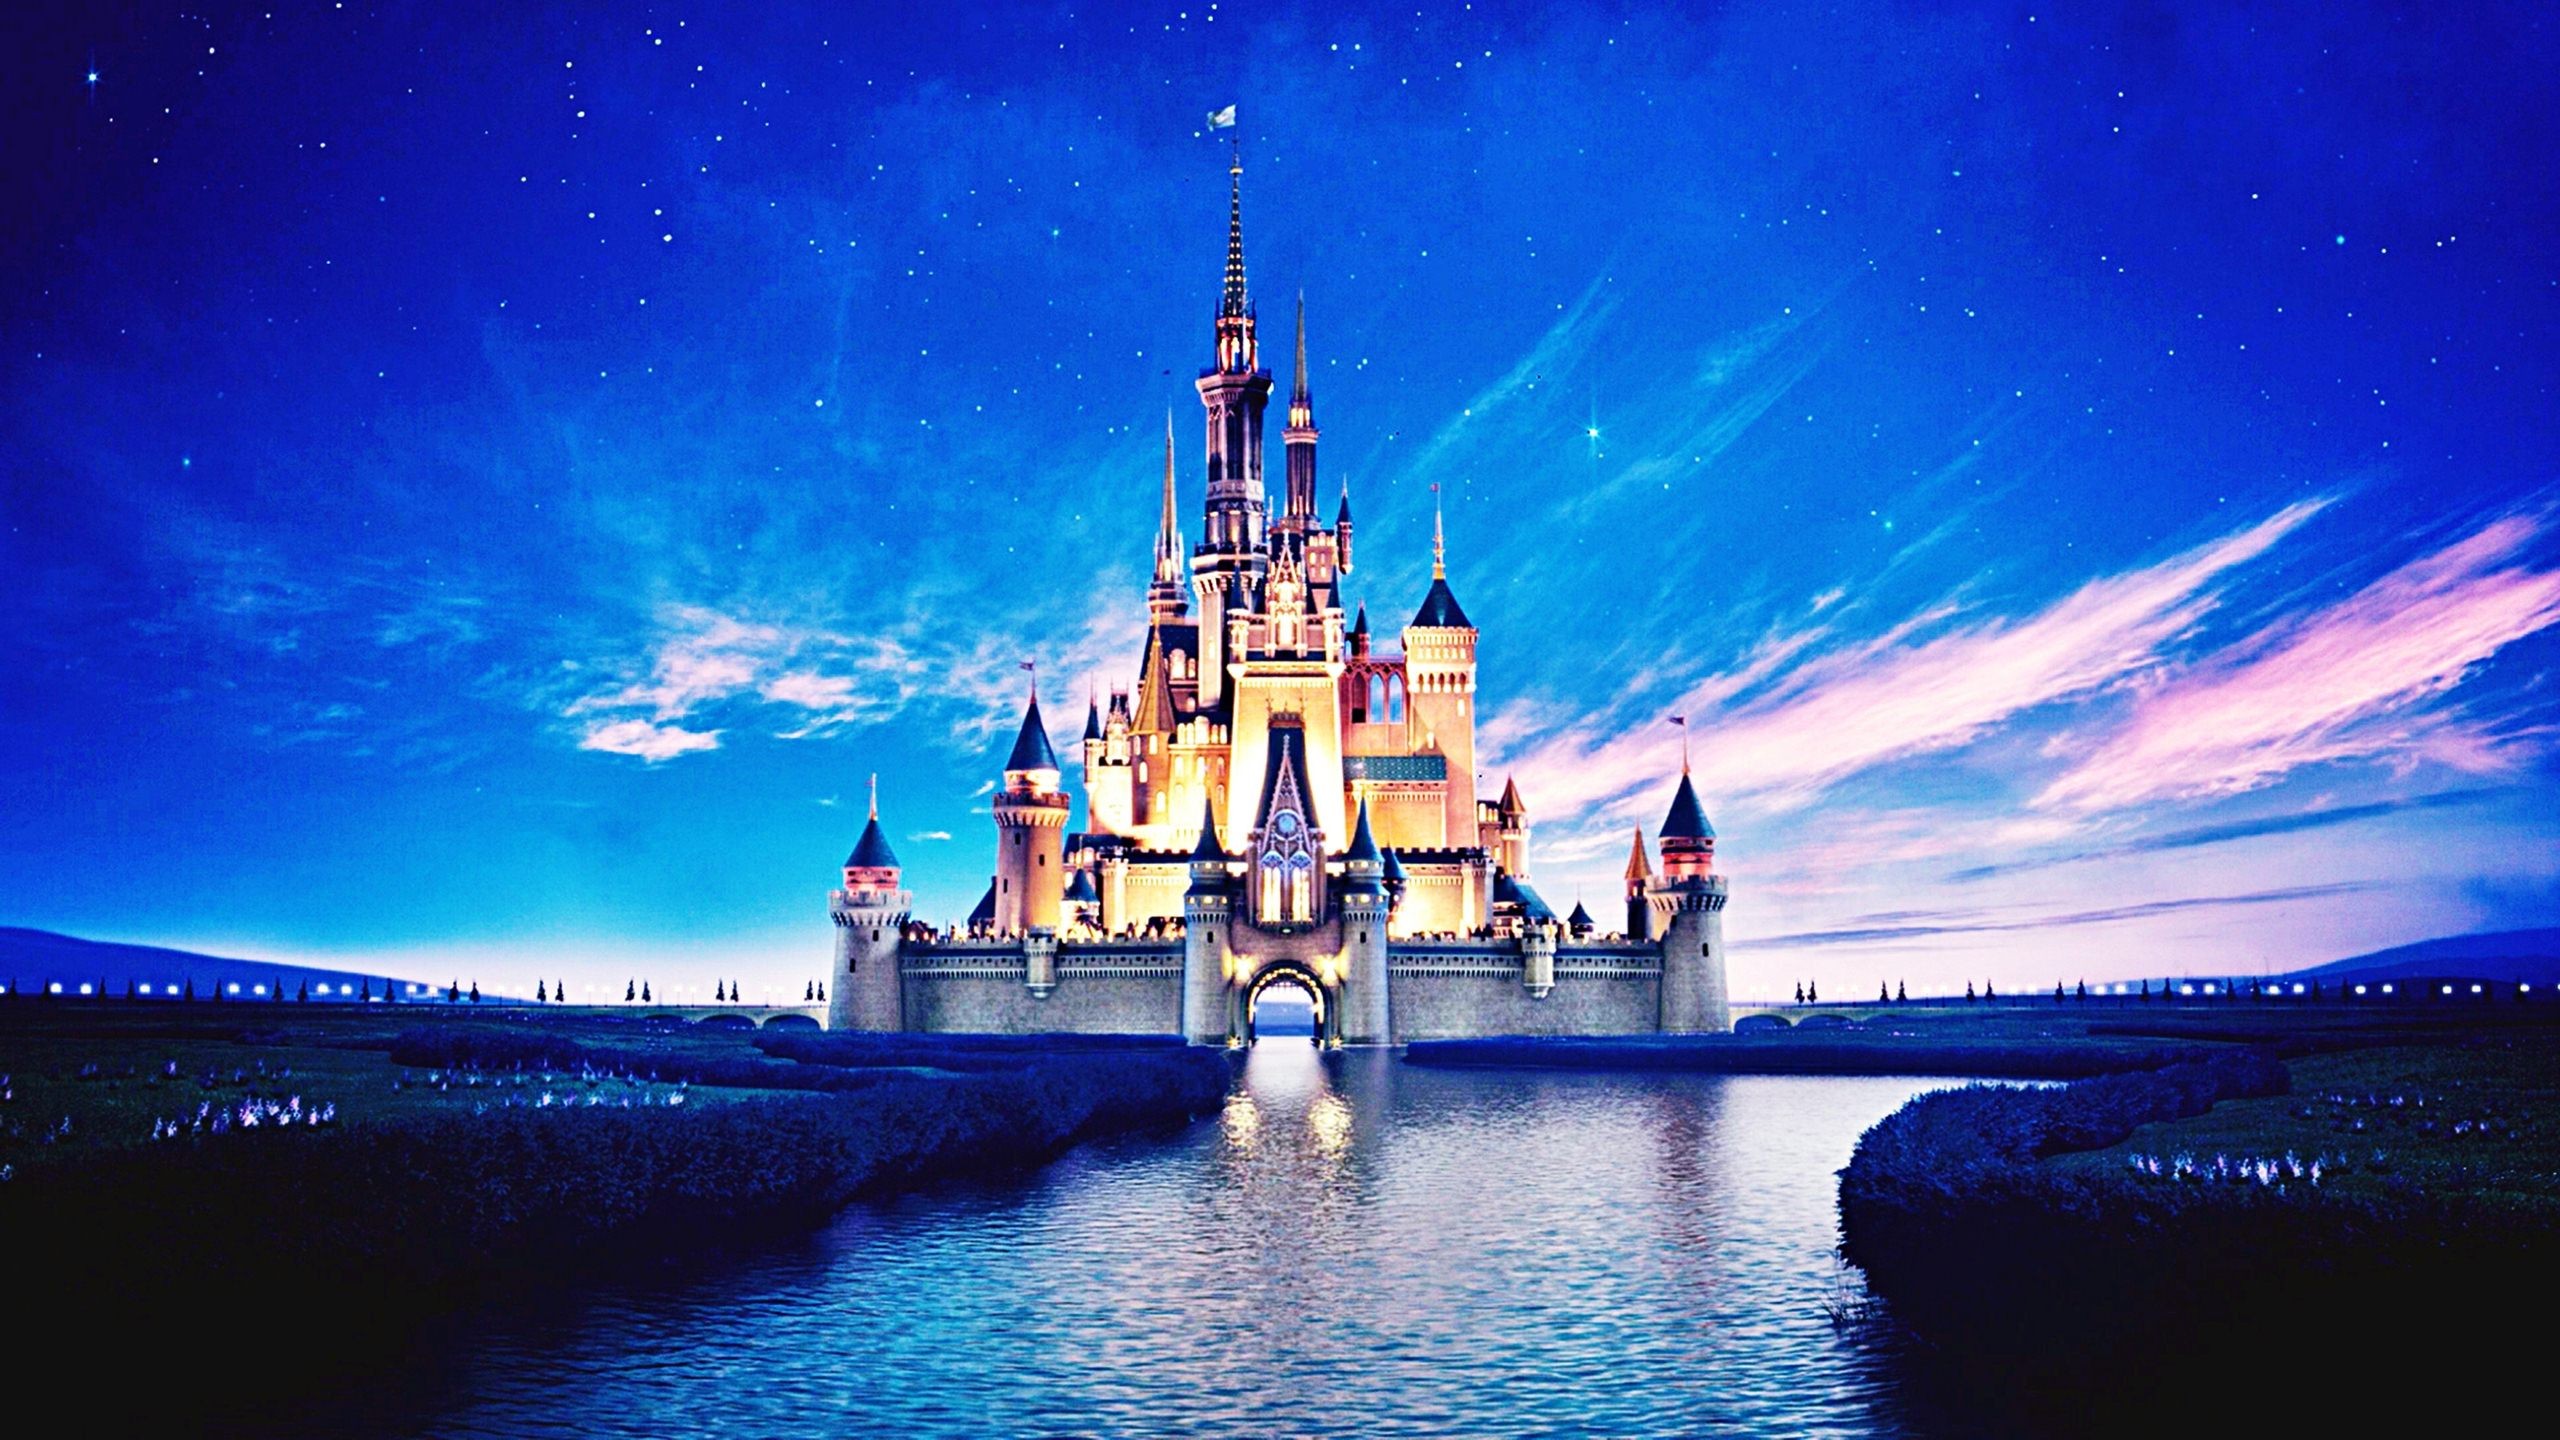 Related for Disney Castle HDQ Wallpapers